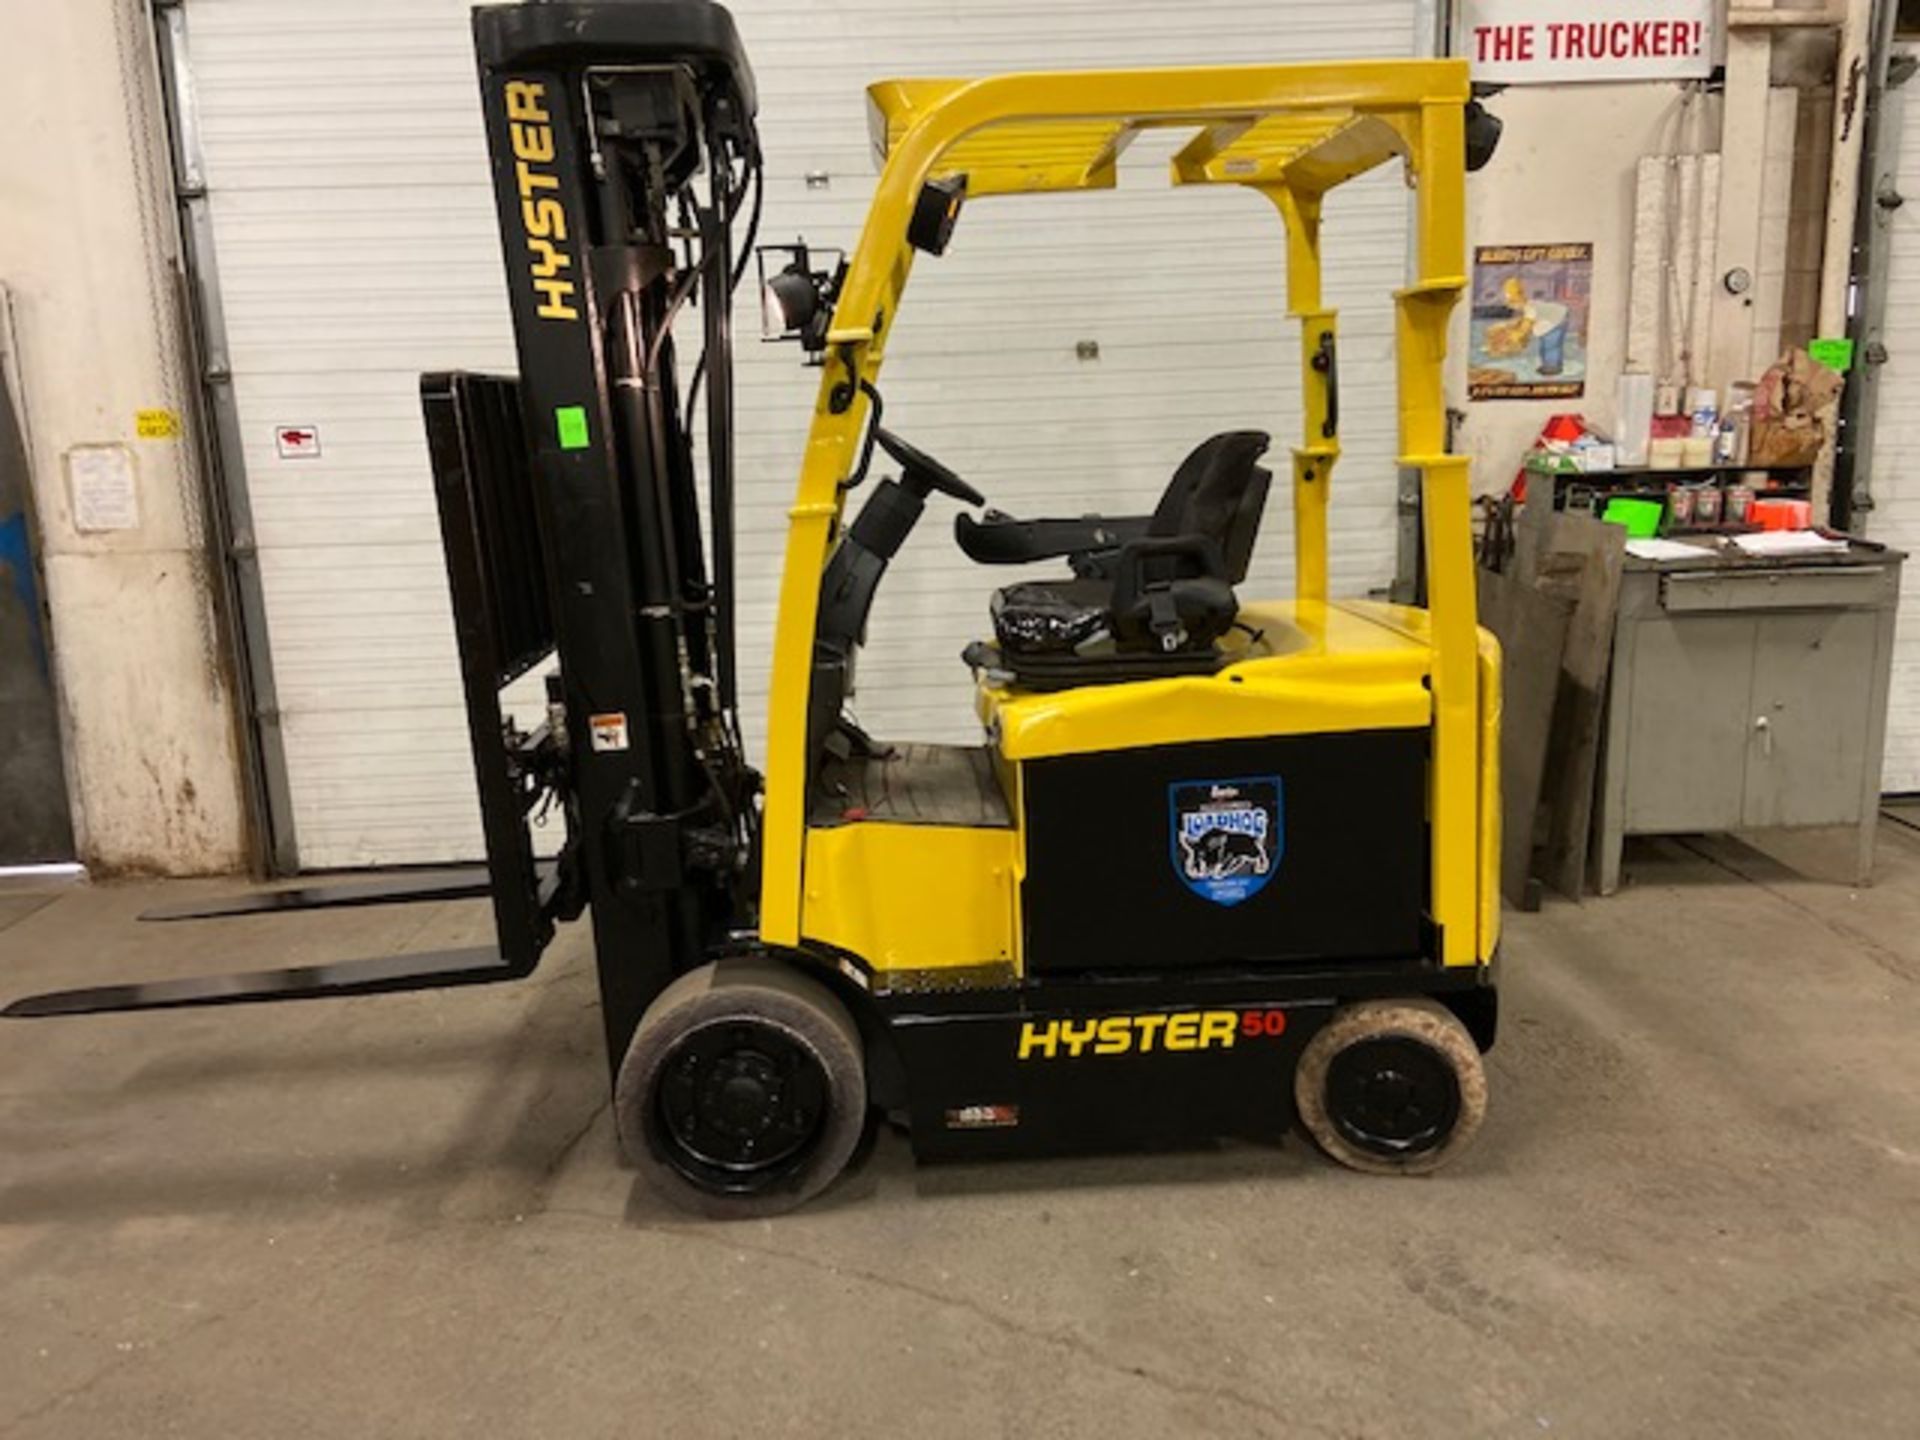 FREE CUSTOMS - 2013 Hyster 5000lbs Capacity Forklift Electric with 4-STAGE MAST with sideshift &